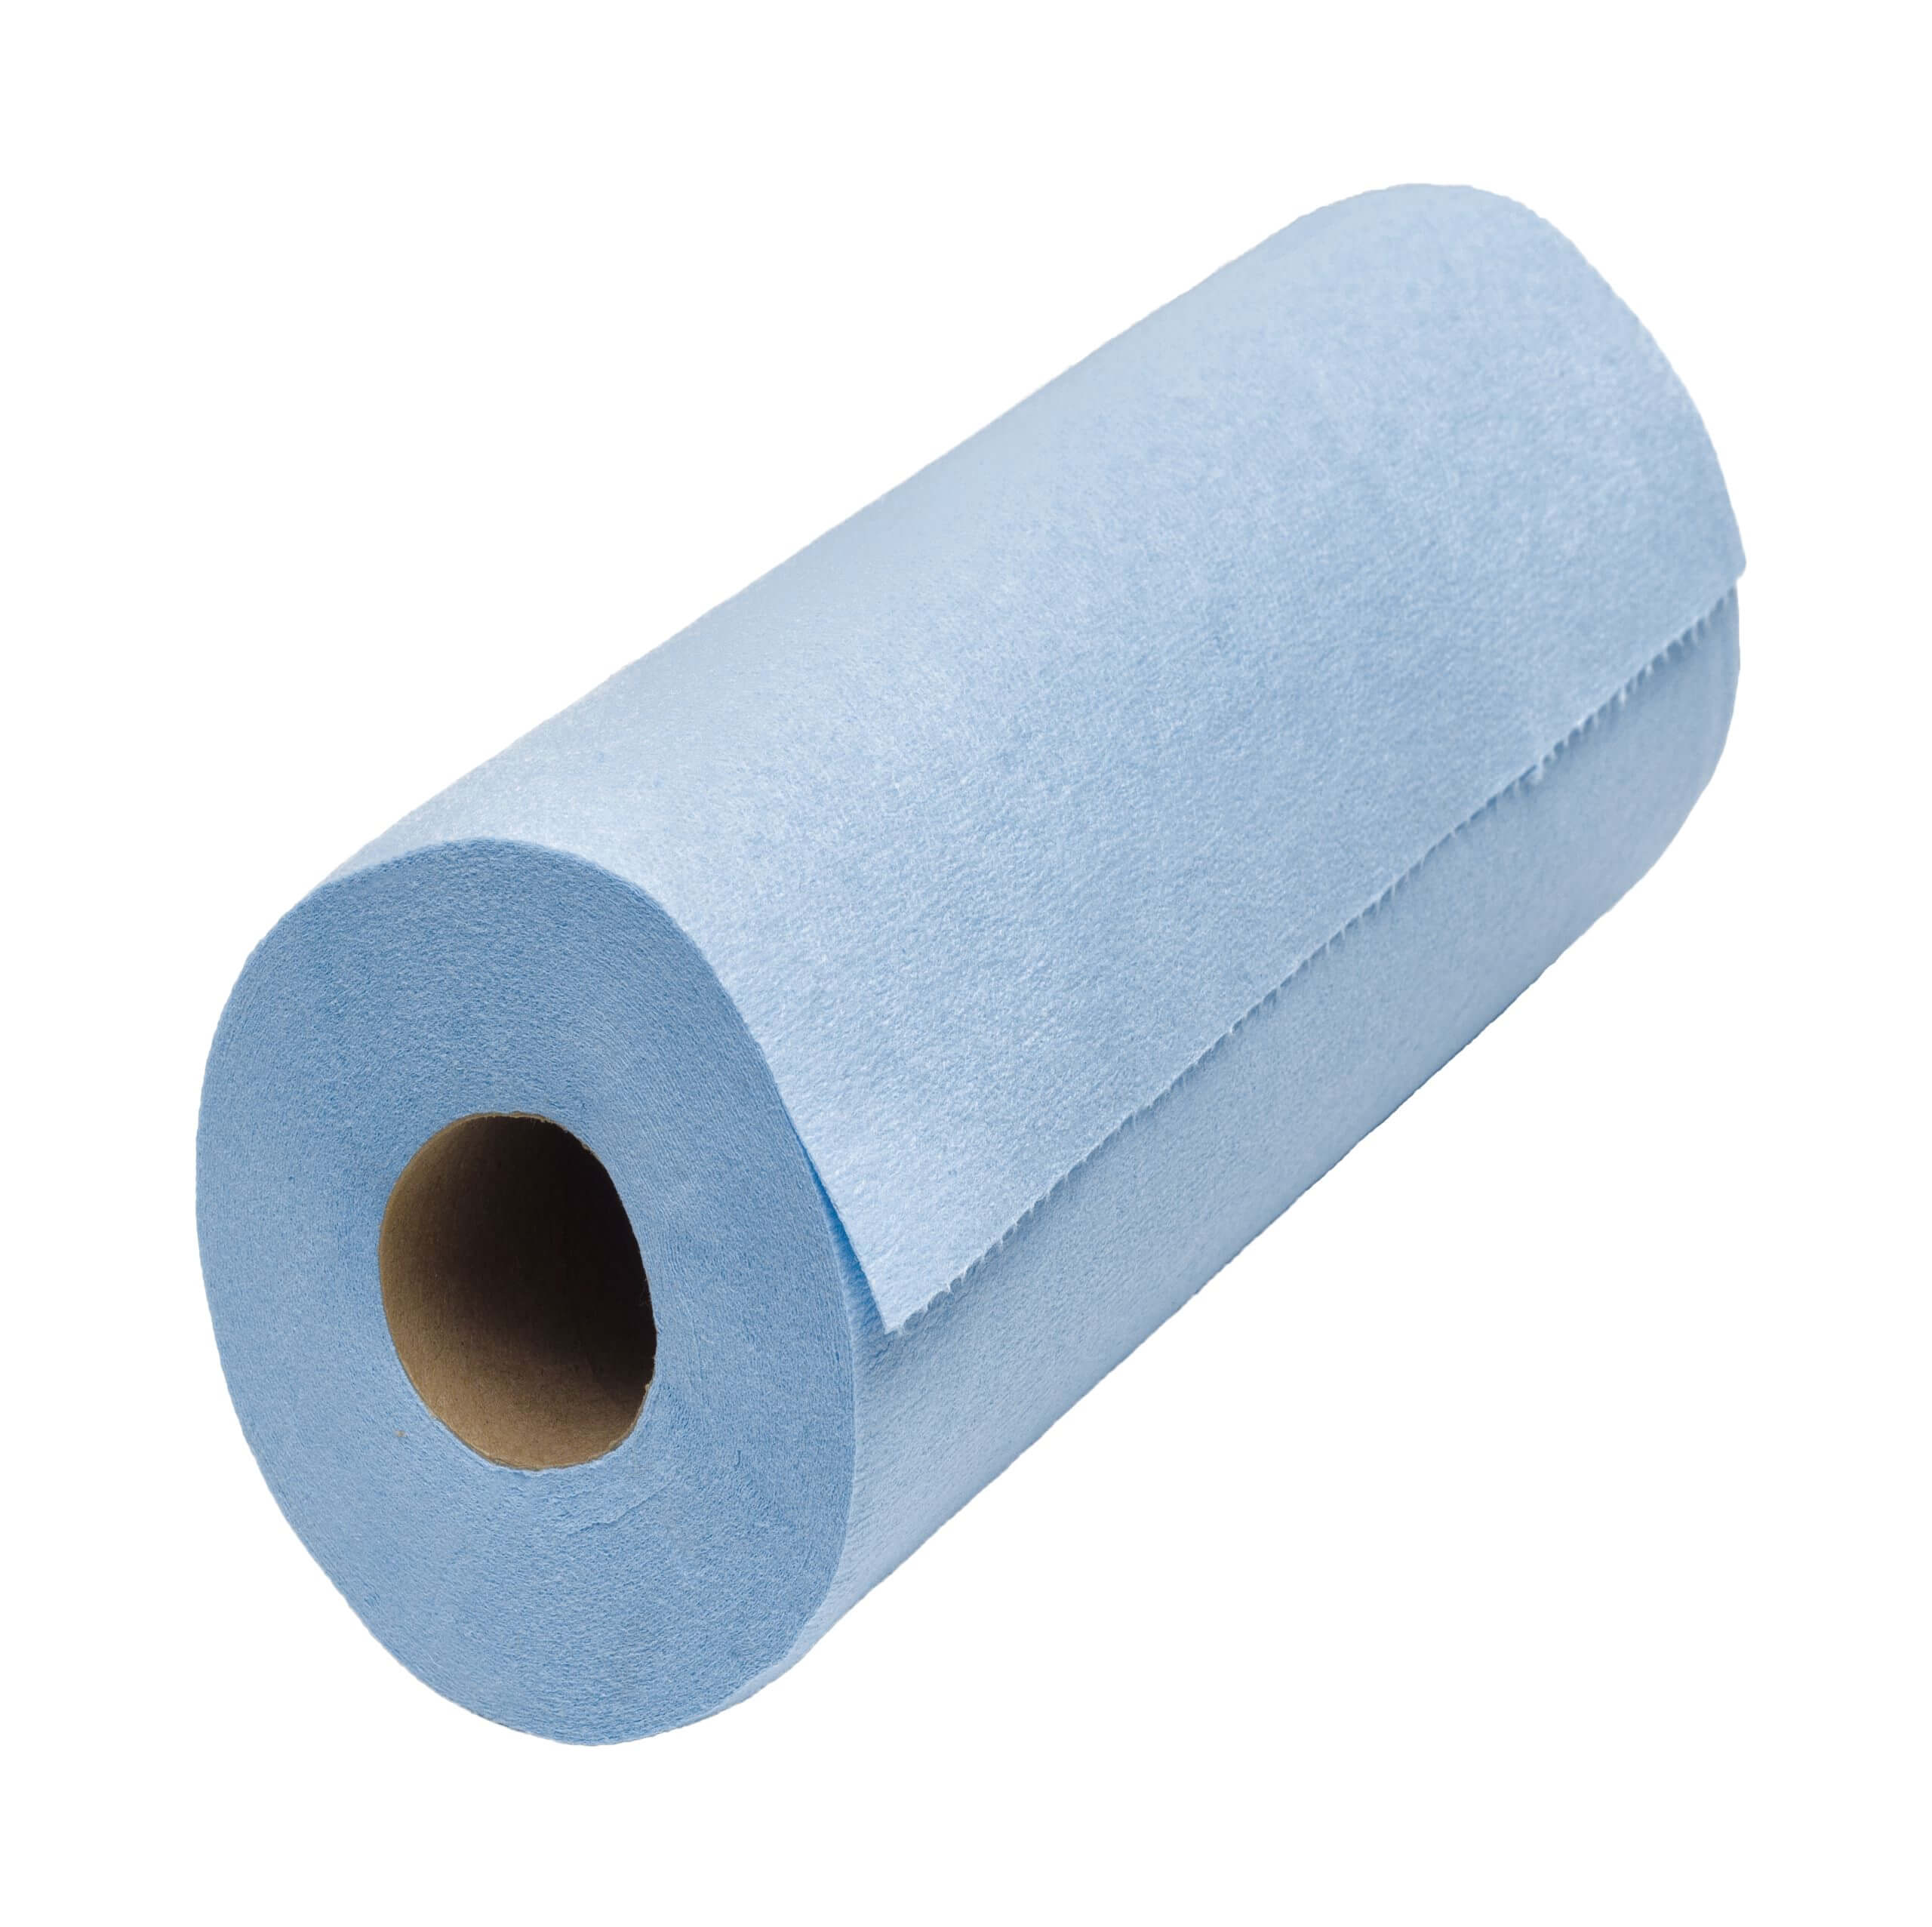 An image of blue Centrefeed Paper Towels.